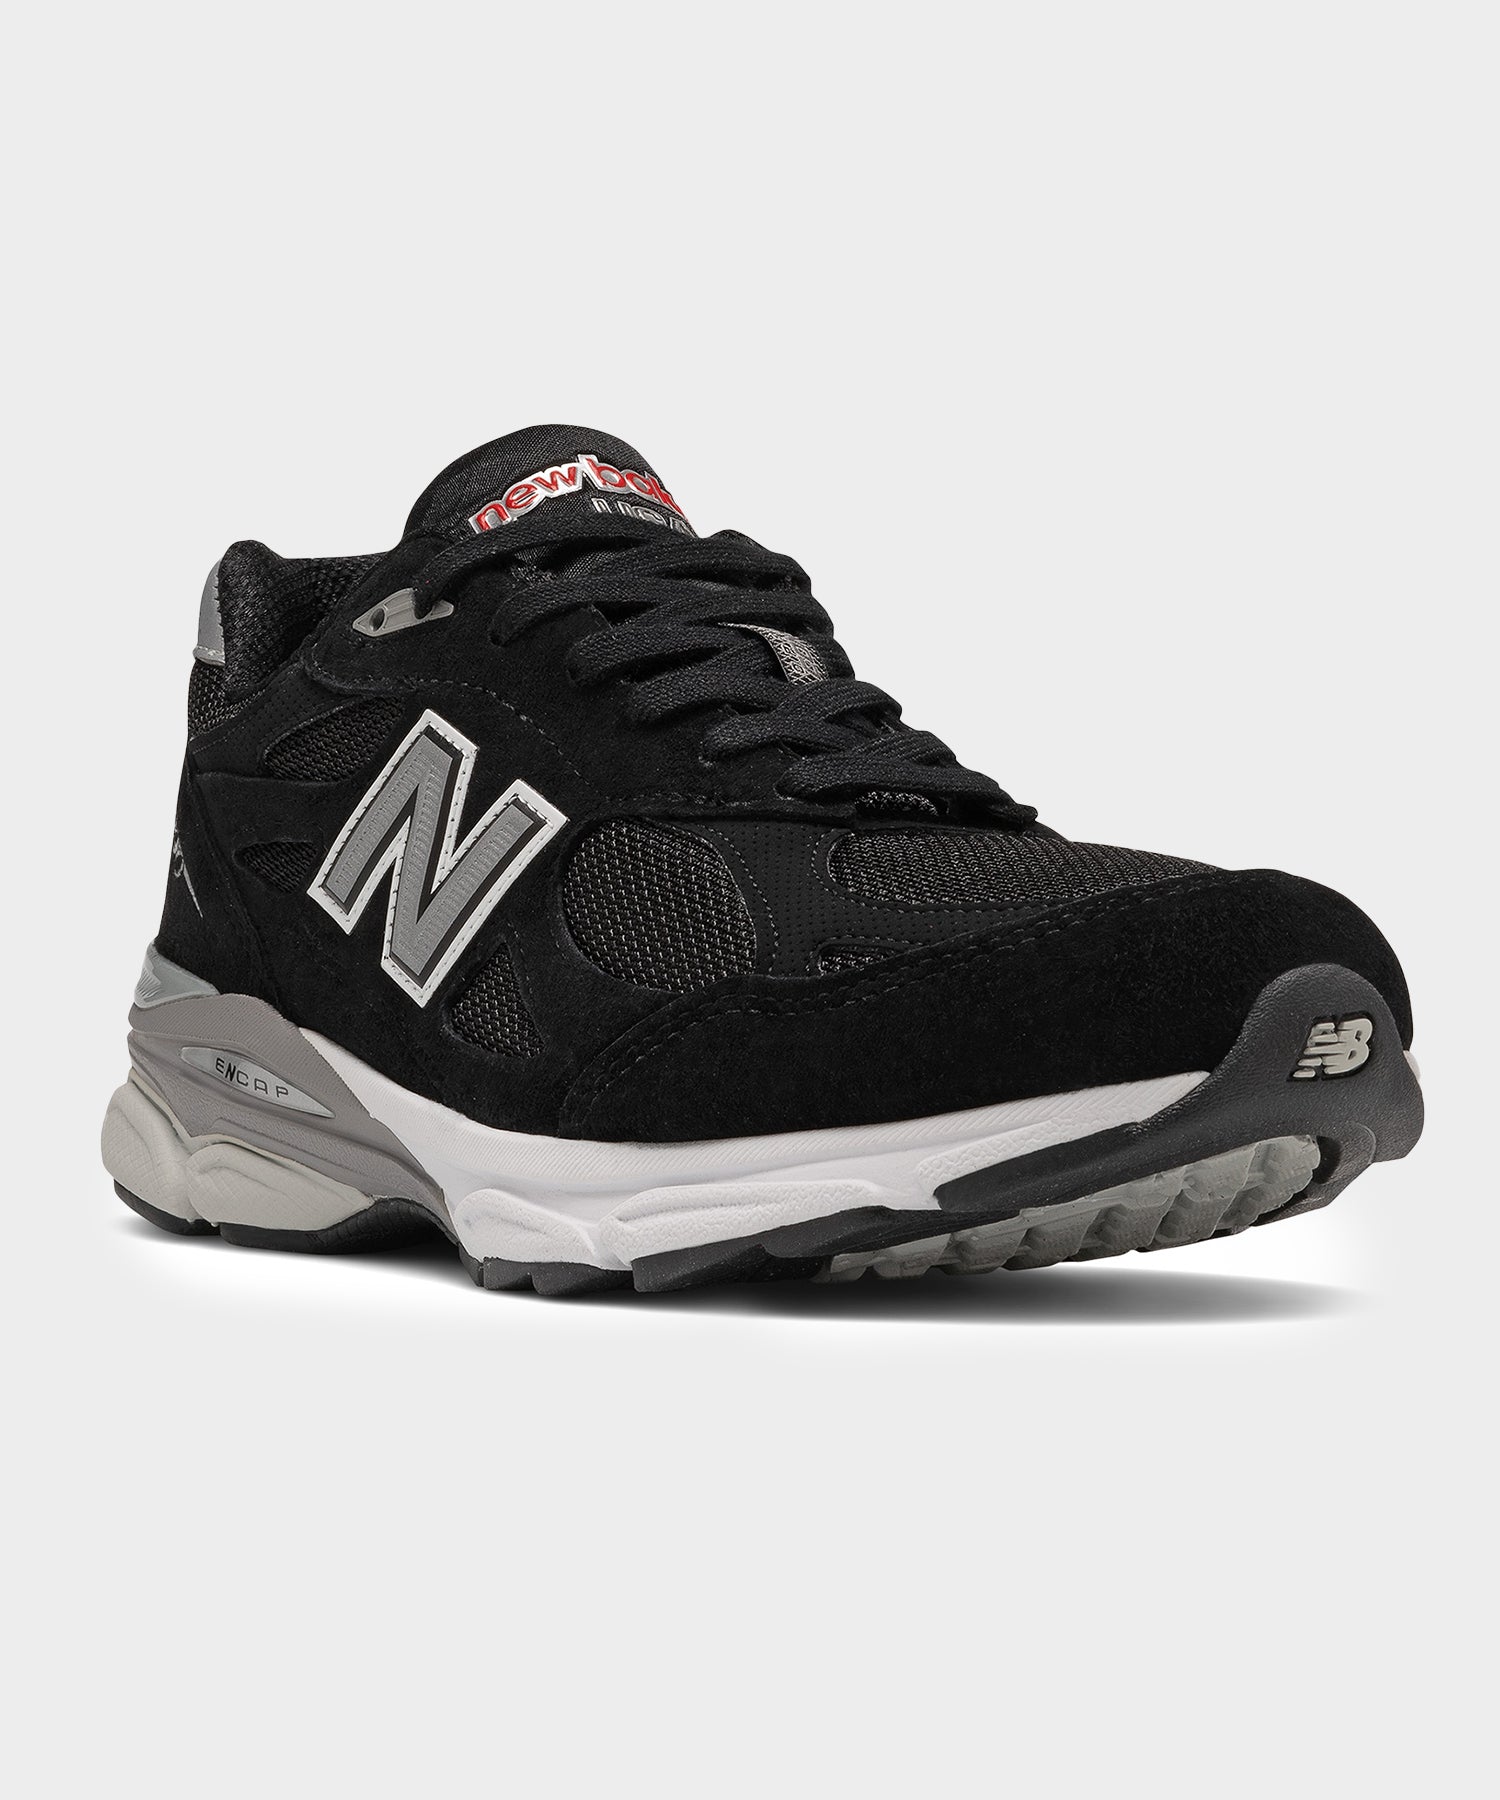 New Balance Made In the US 990 in Black